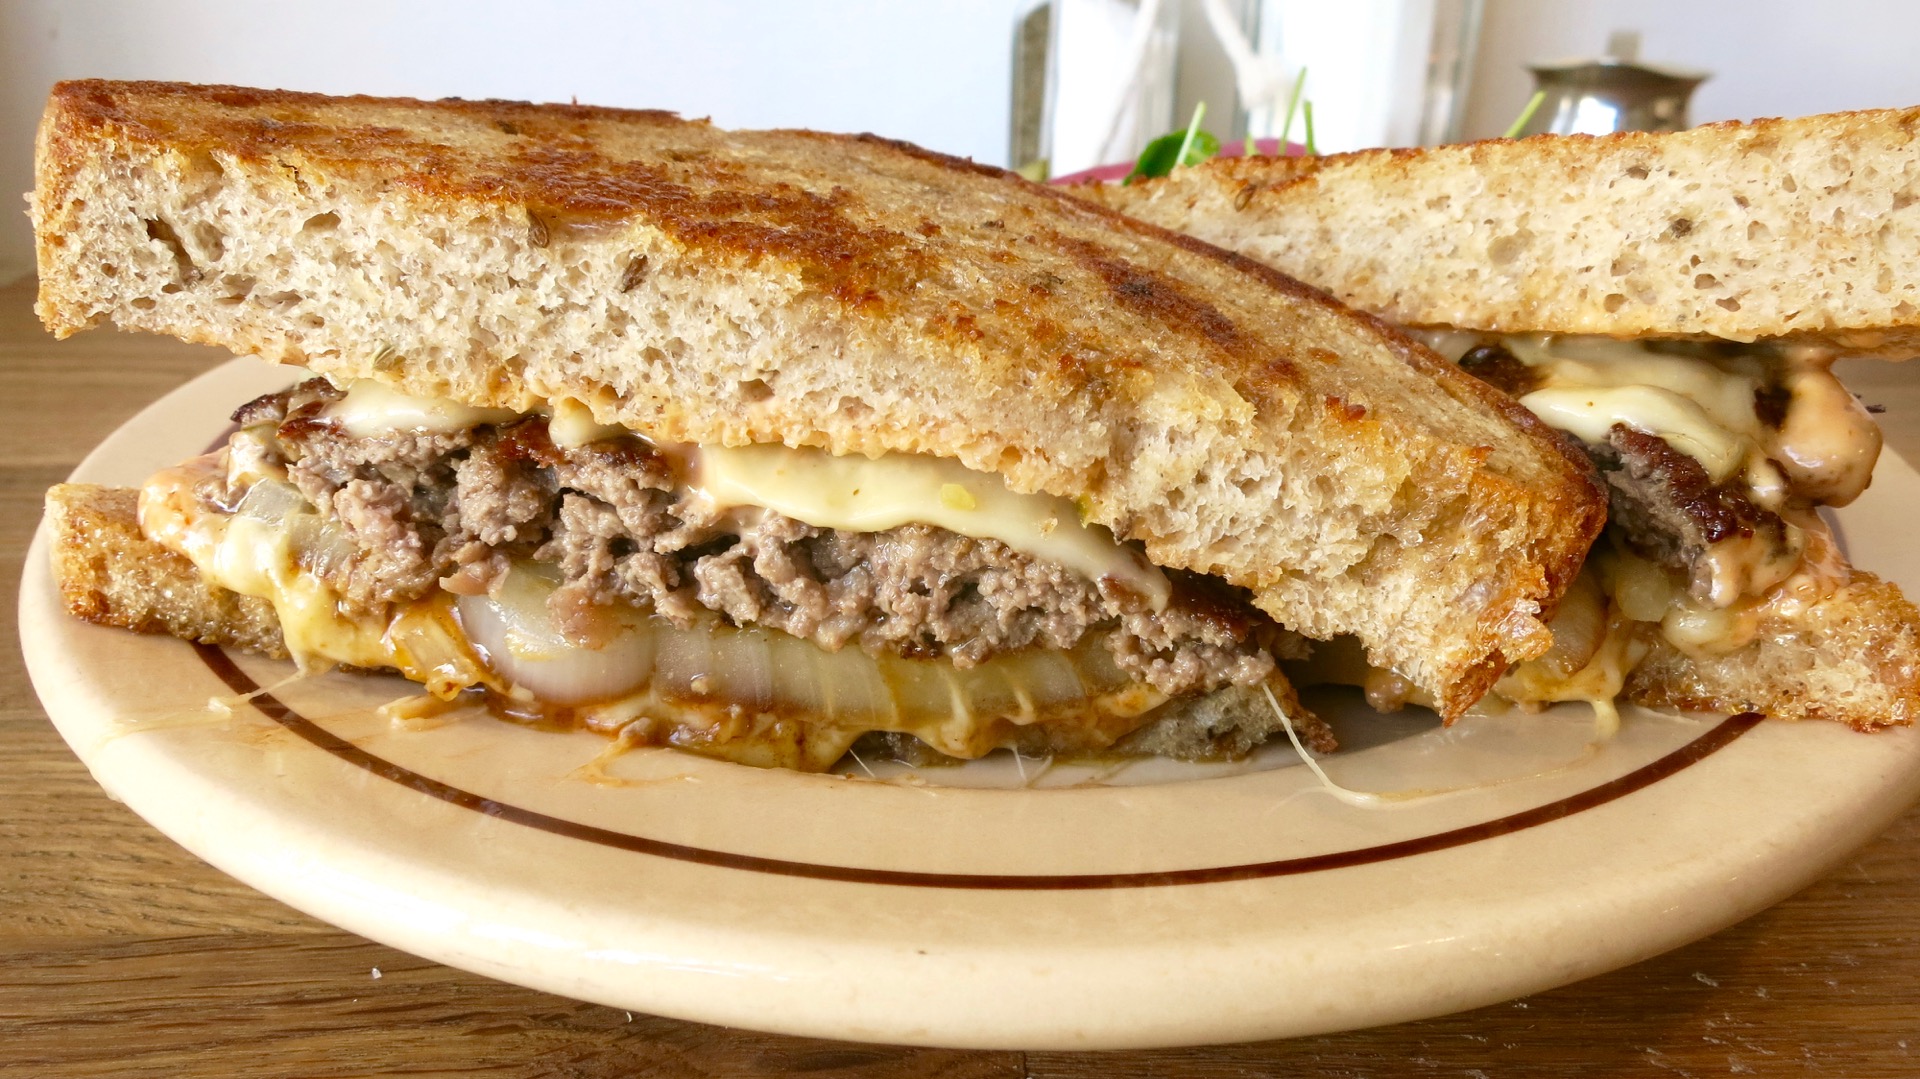 Sequoia Diner's stellar patty melt is above and beyond what you'd find at a regular diner.